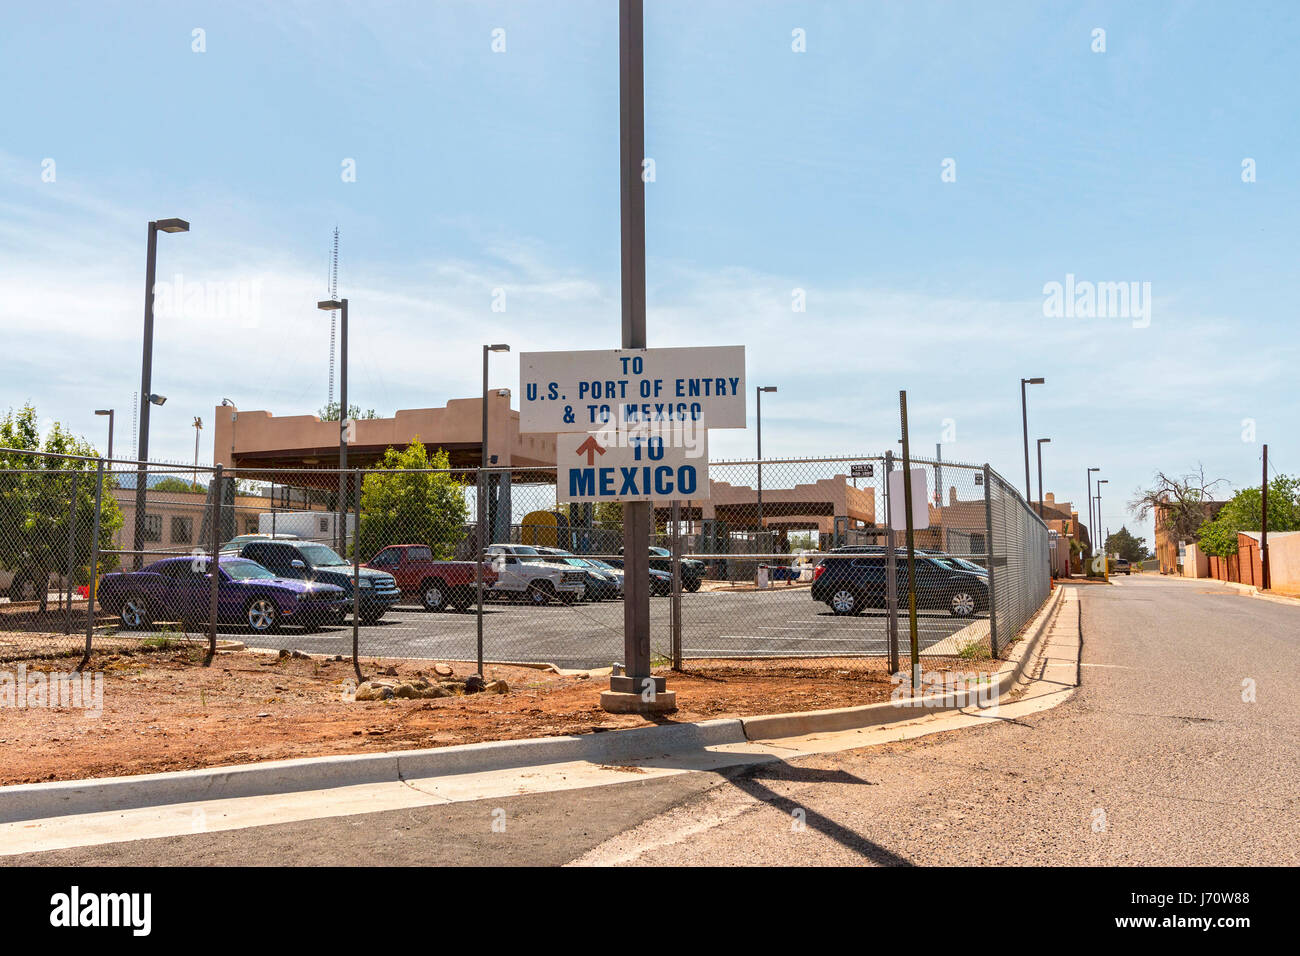 Border crossing for travel between the US and Mexico south of Bisbee, AZ., USA. Stock Photo